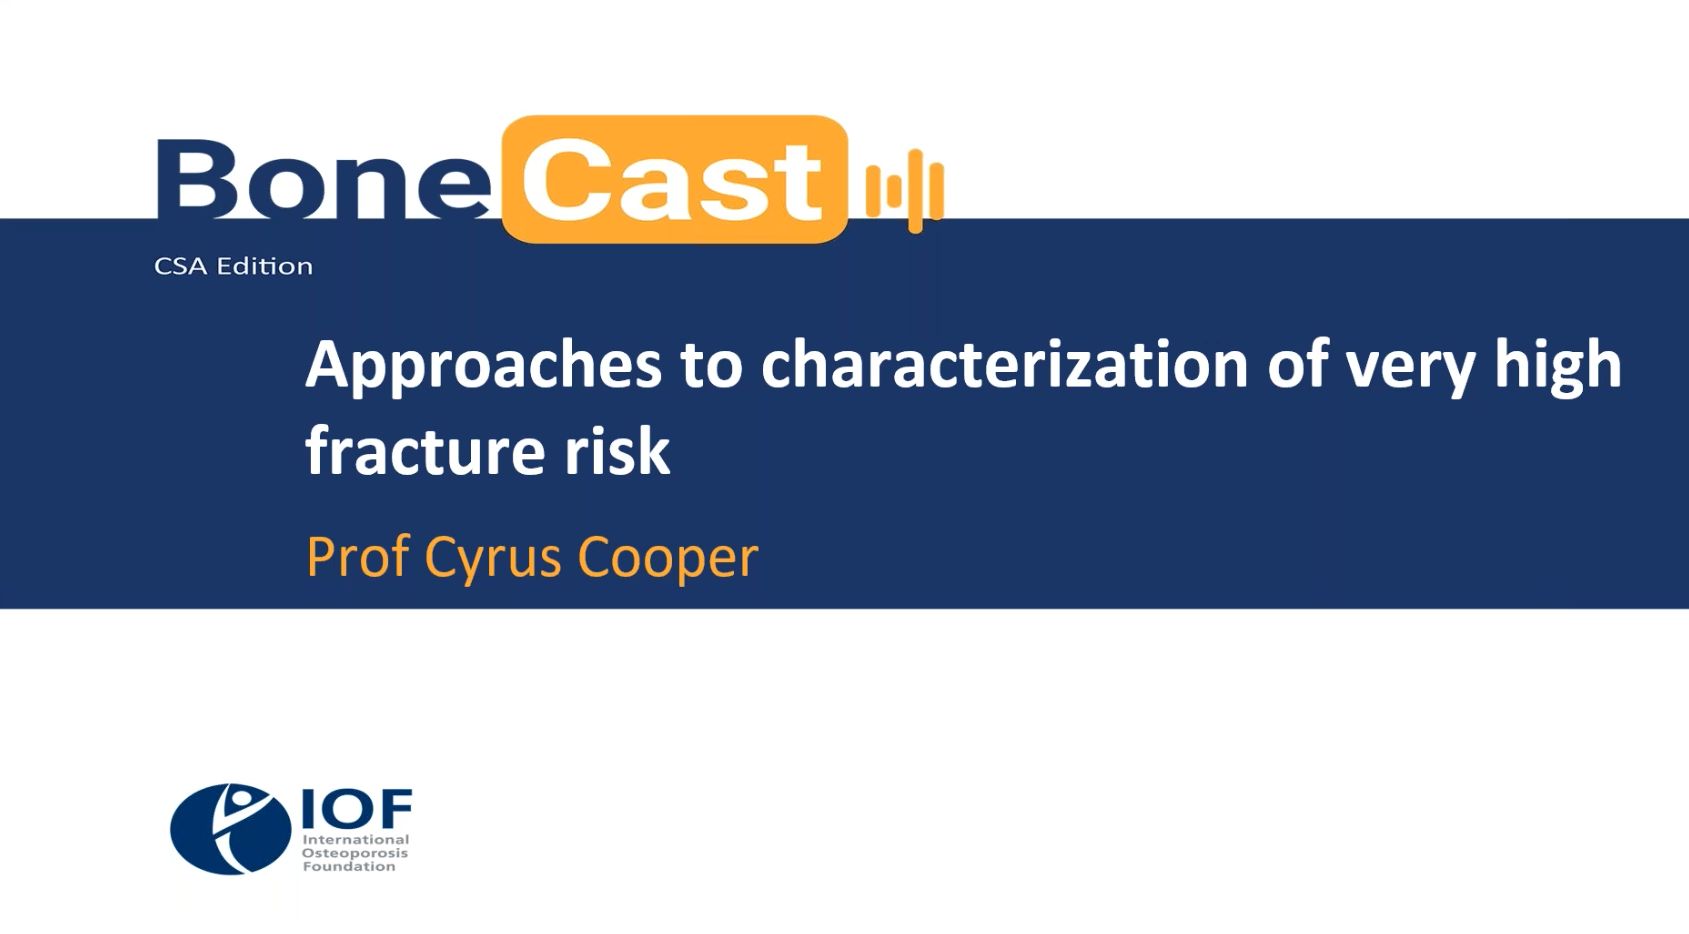 IOF Webinar by Director on Novel Approaches to Fracture Risk Assessment